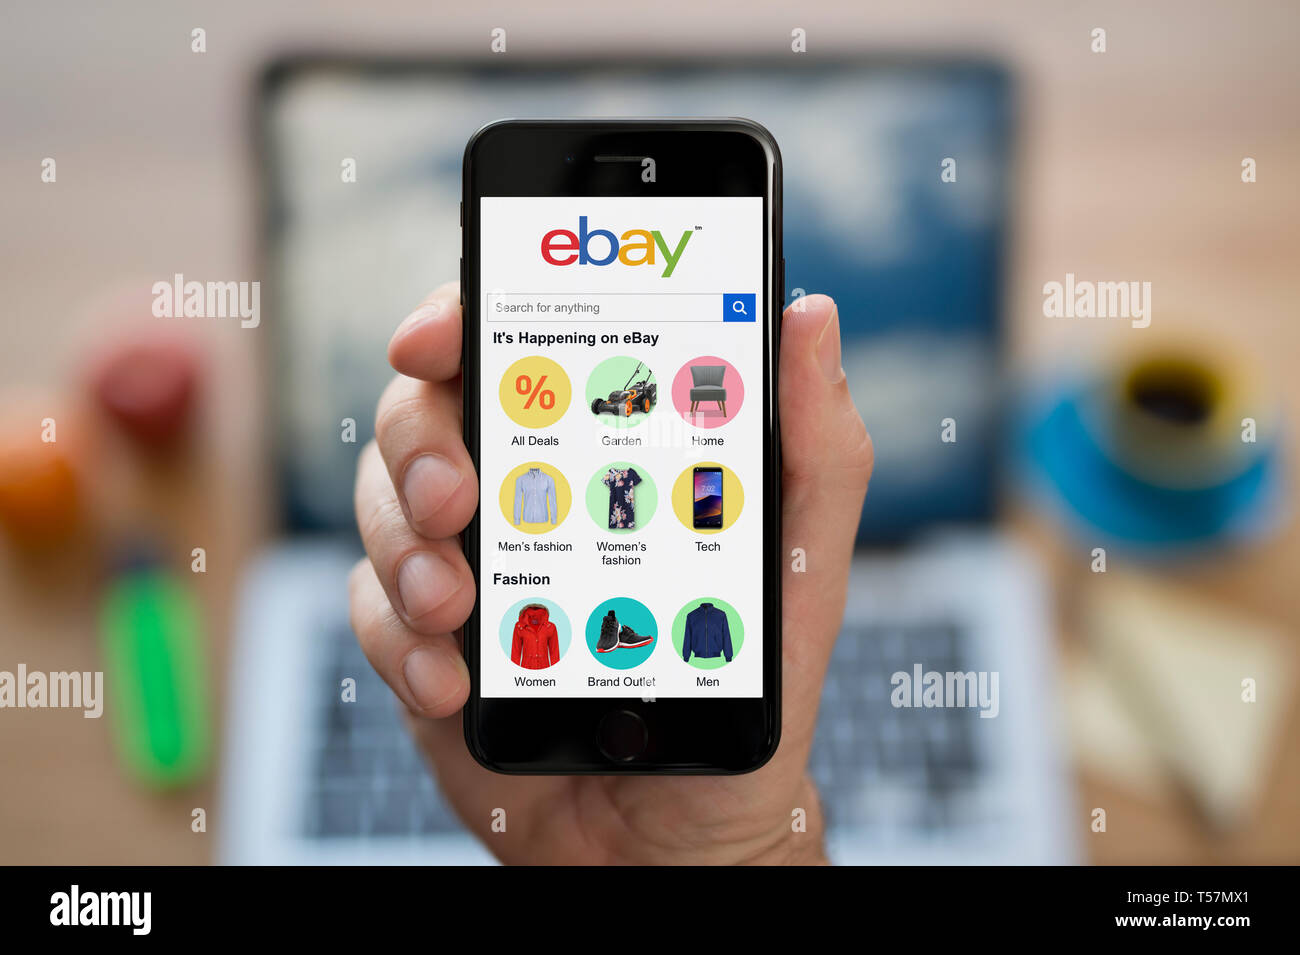 A man looks at his iPhone which displays the ebay logo (Editorial use only). Stock Photo